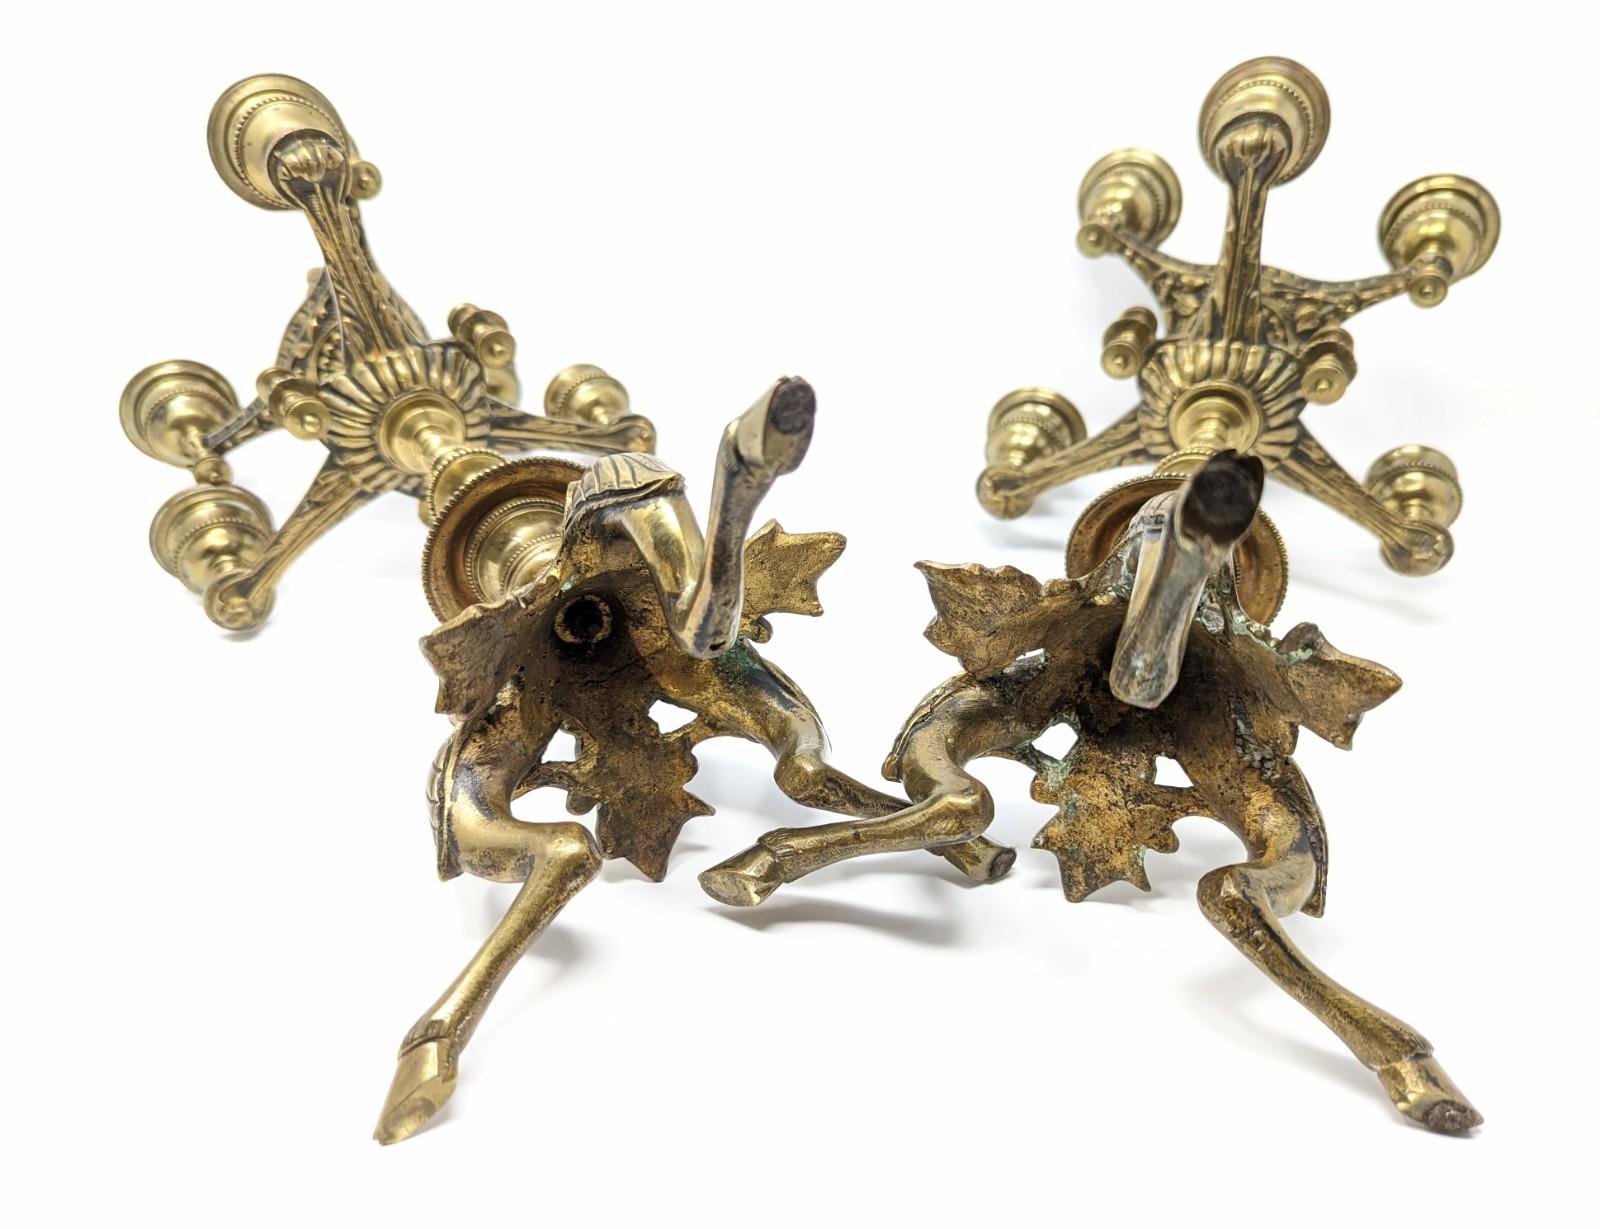 Pair of Antique Candelabras, 19th Century European Brass Candlesticks Footed For Sale 4